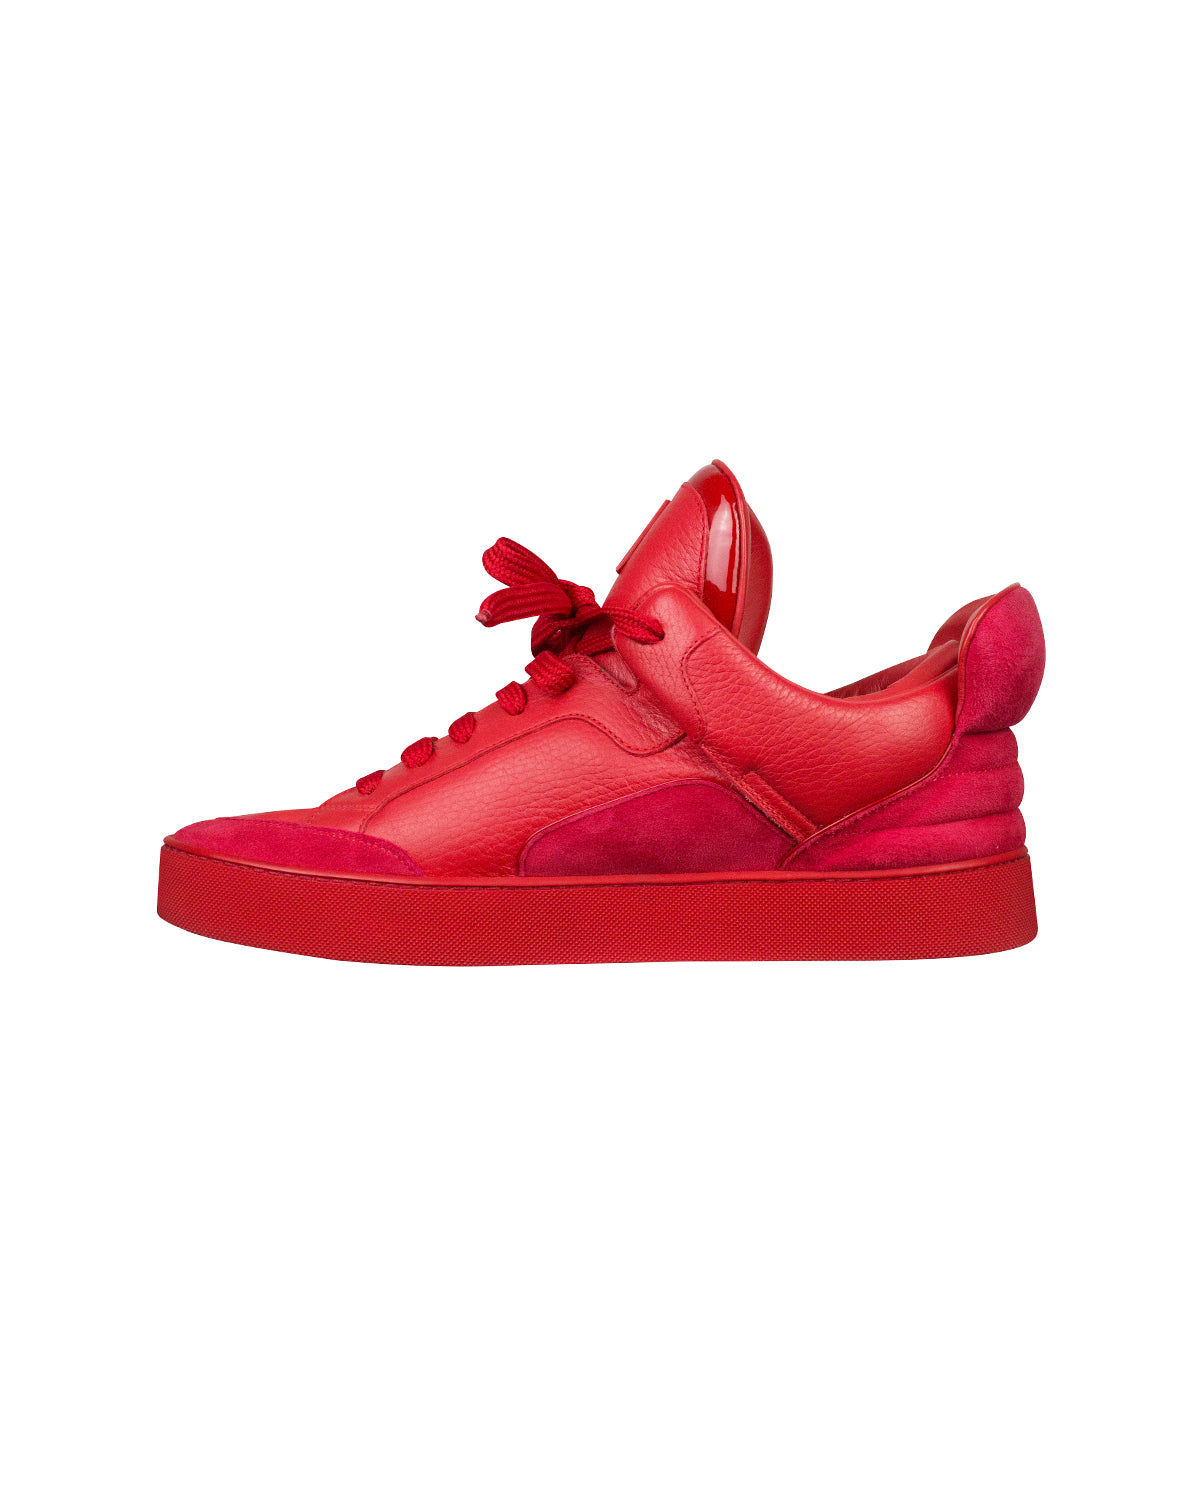 Lot - Kanye West x Louis Vuitton Don, Red, size US 8